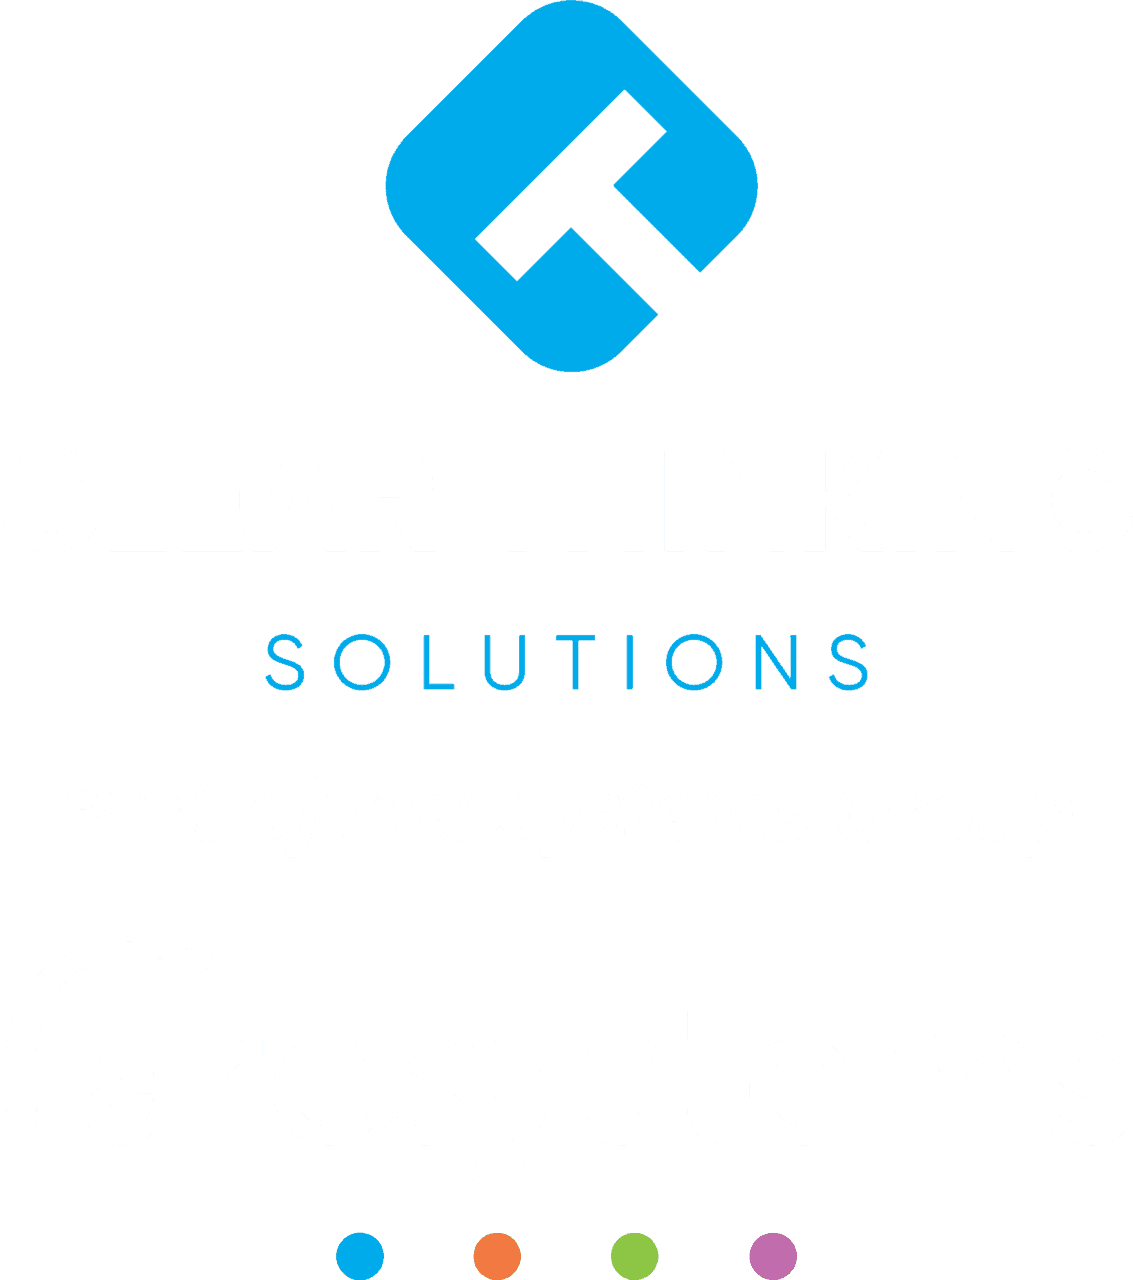 Clear Thinking Solutions